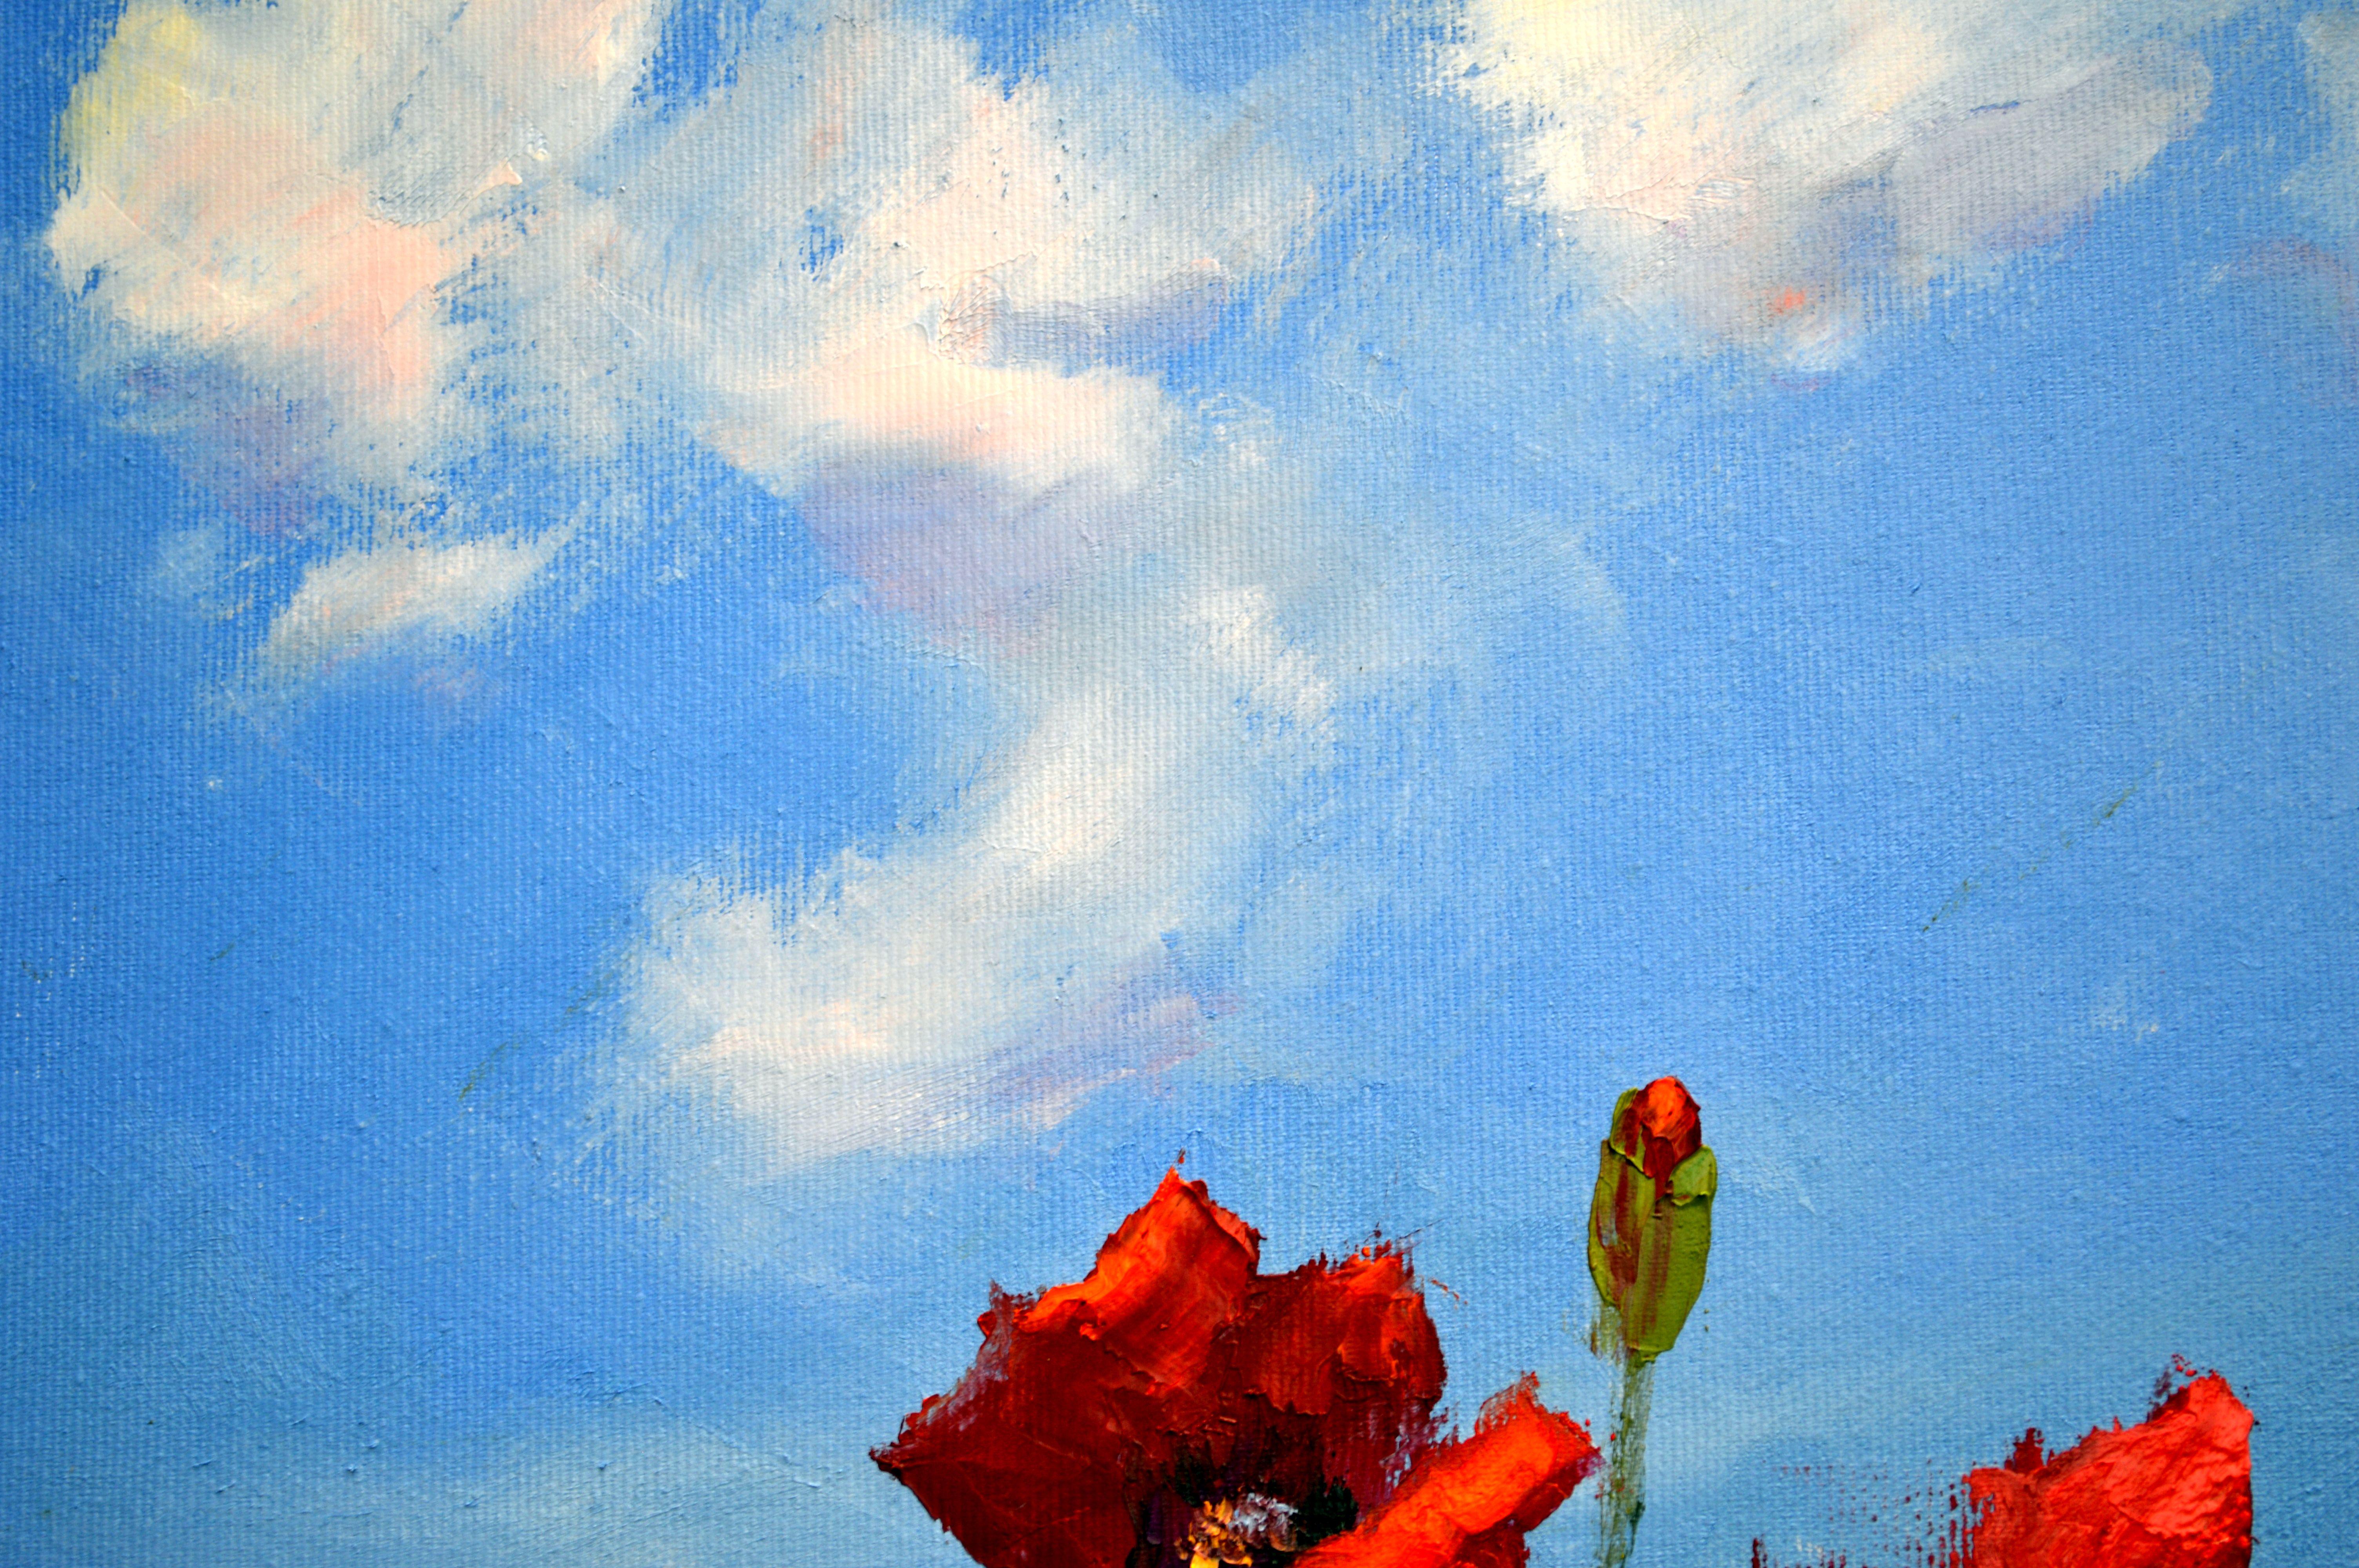 In this oil painting, I've poured my soul into capturing the vivid essence of nature's beauty. The vibrant red poppies dance against a serene sky, symbolizing resilience and the fleeting nature of life. Brushstrokes blend impressionism with realism,